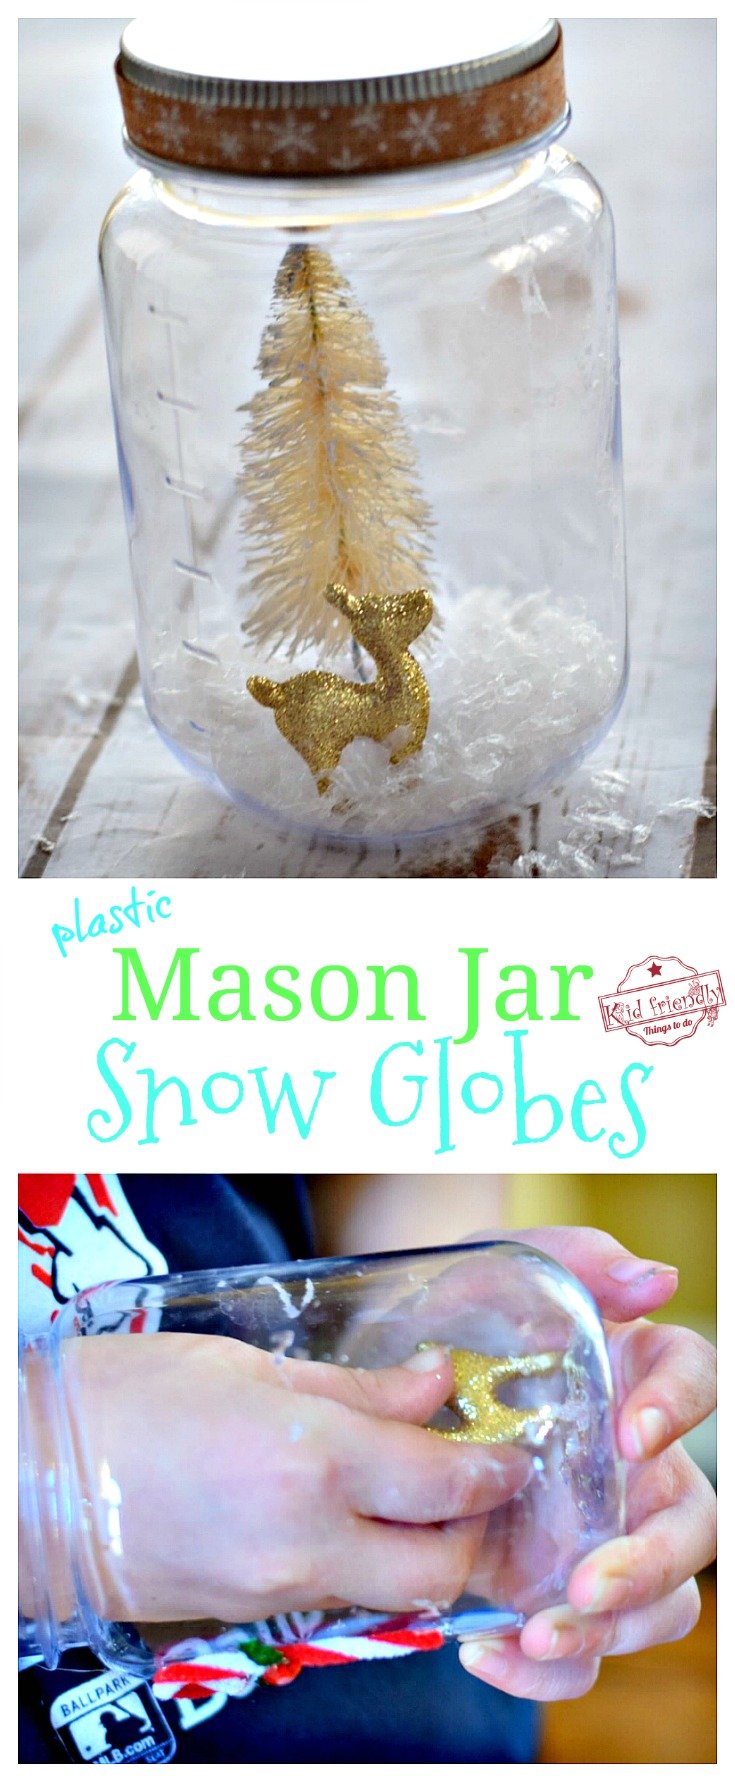 DIY Mason Jar Snow Globes for a Winter or Christmas Craft - OR - Christmas Ornament - Perfect for Christmas parties with kids! So much fun. - www.kidfriendlythingstodo.com